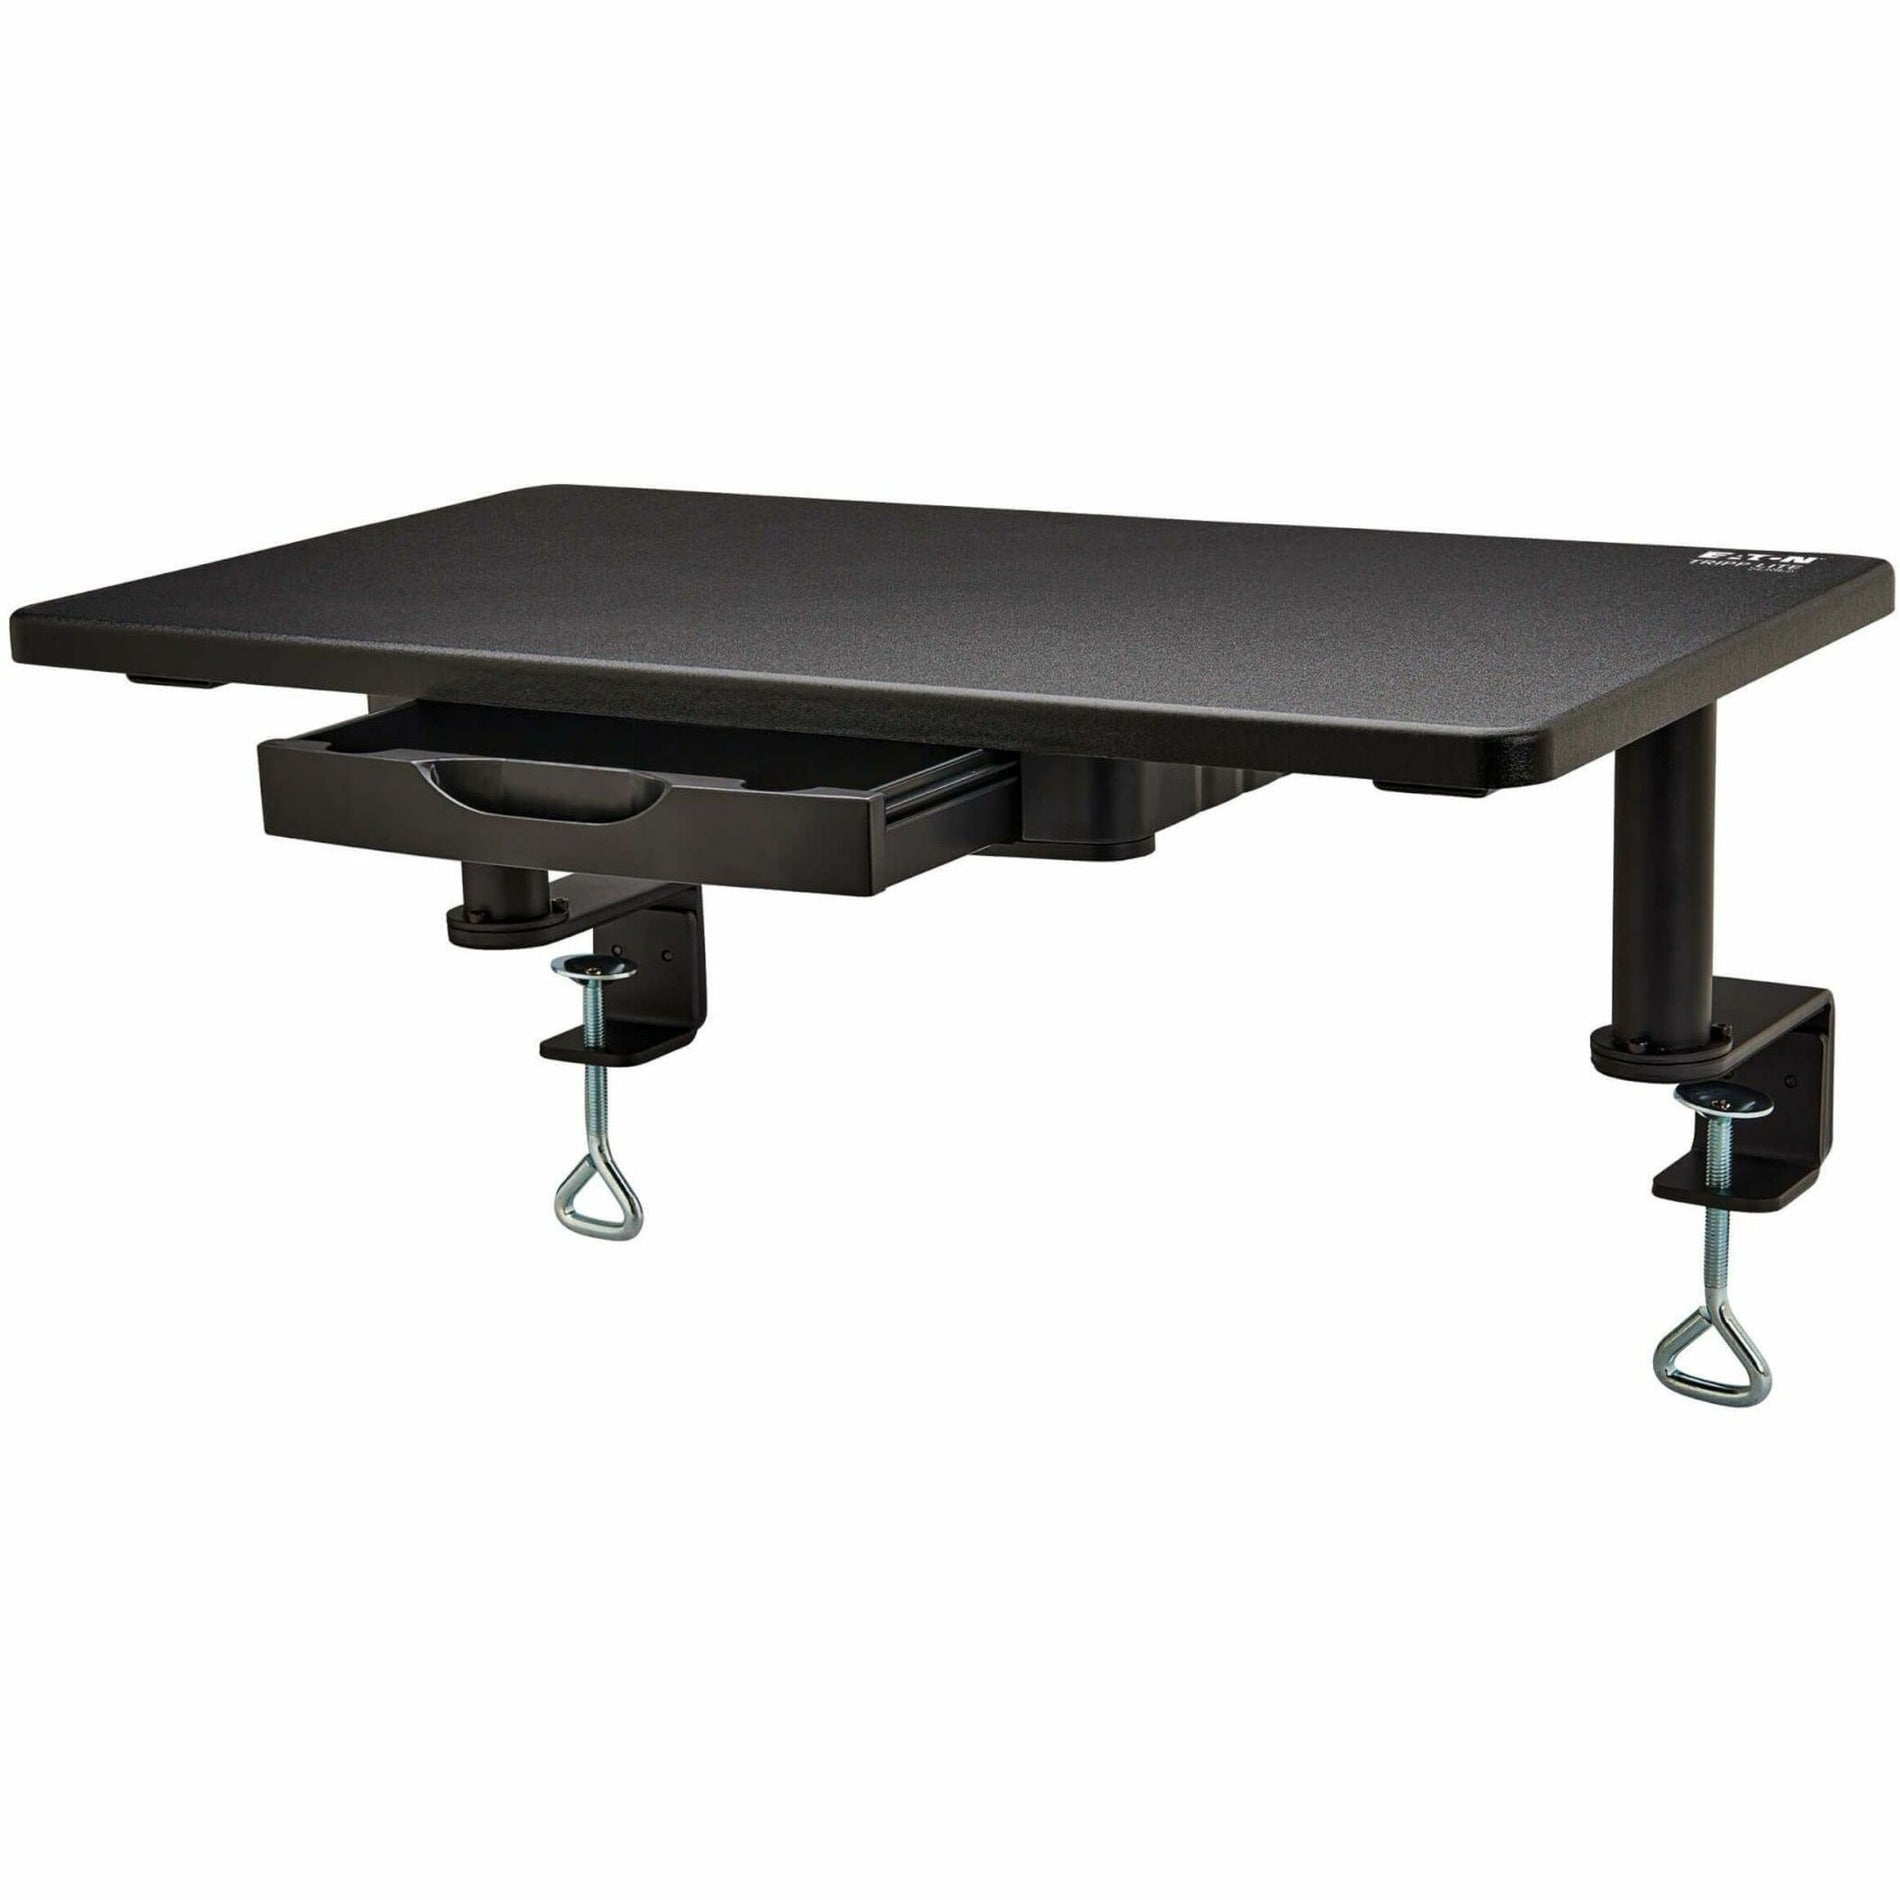 Tripp Lite WWSSC2414TAA Desk-Clamp Monitor Riser with Storage Drawer, TAA Compliant, 5 Year Warranty, RoHS Certified